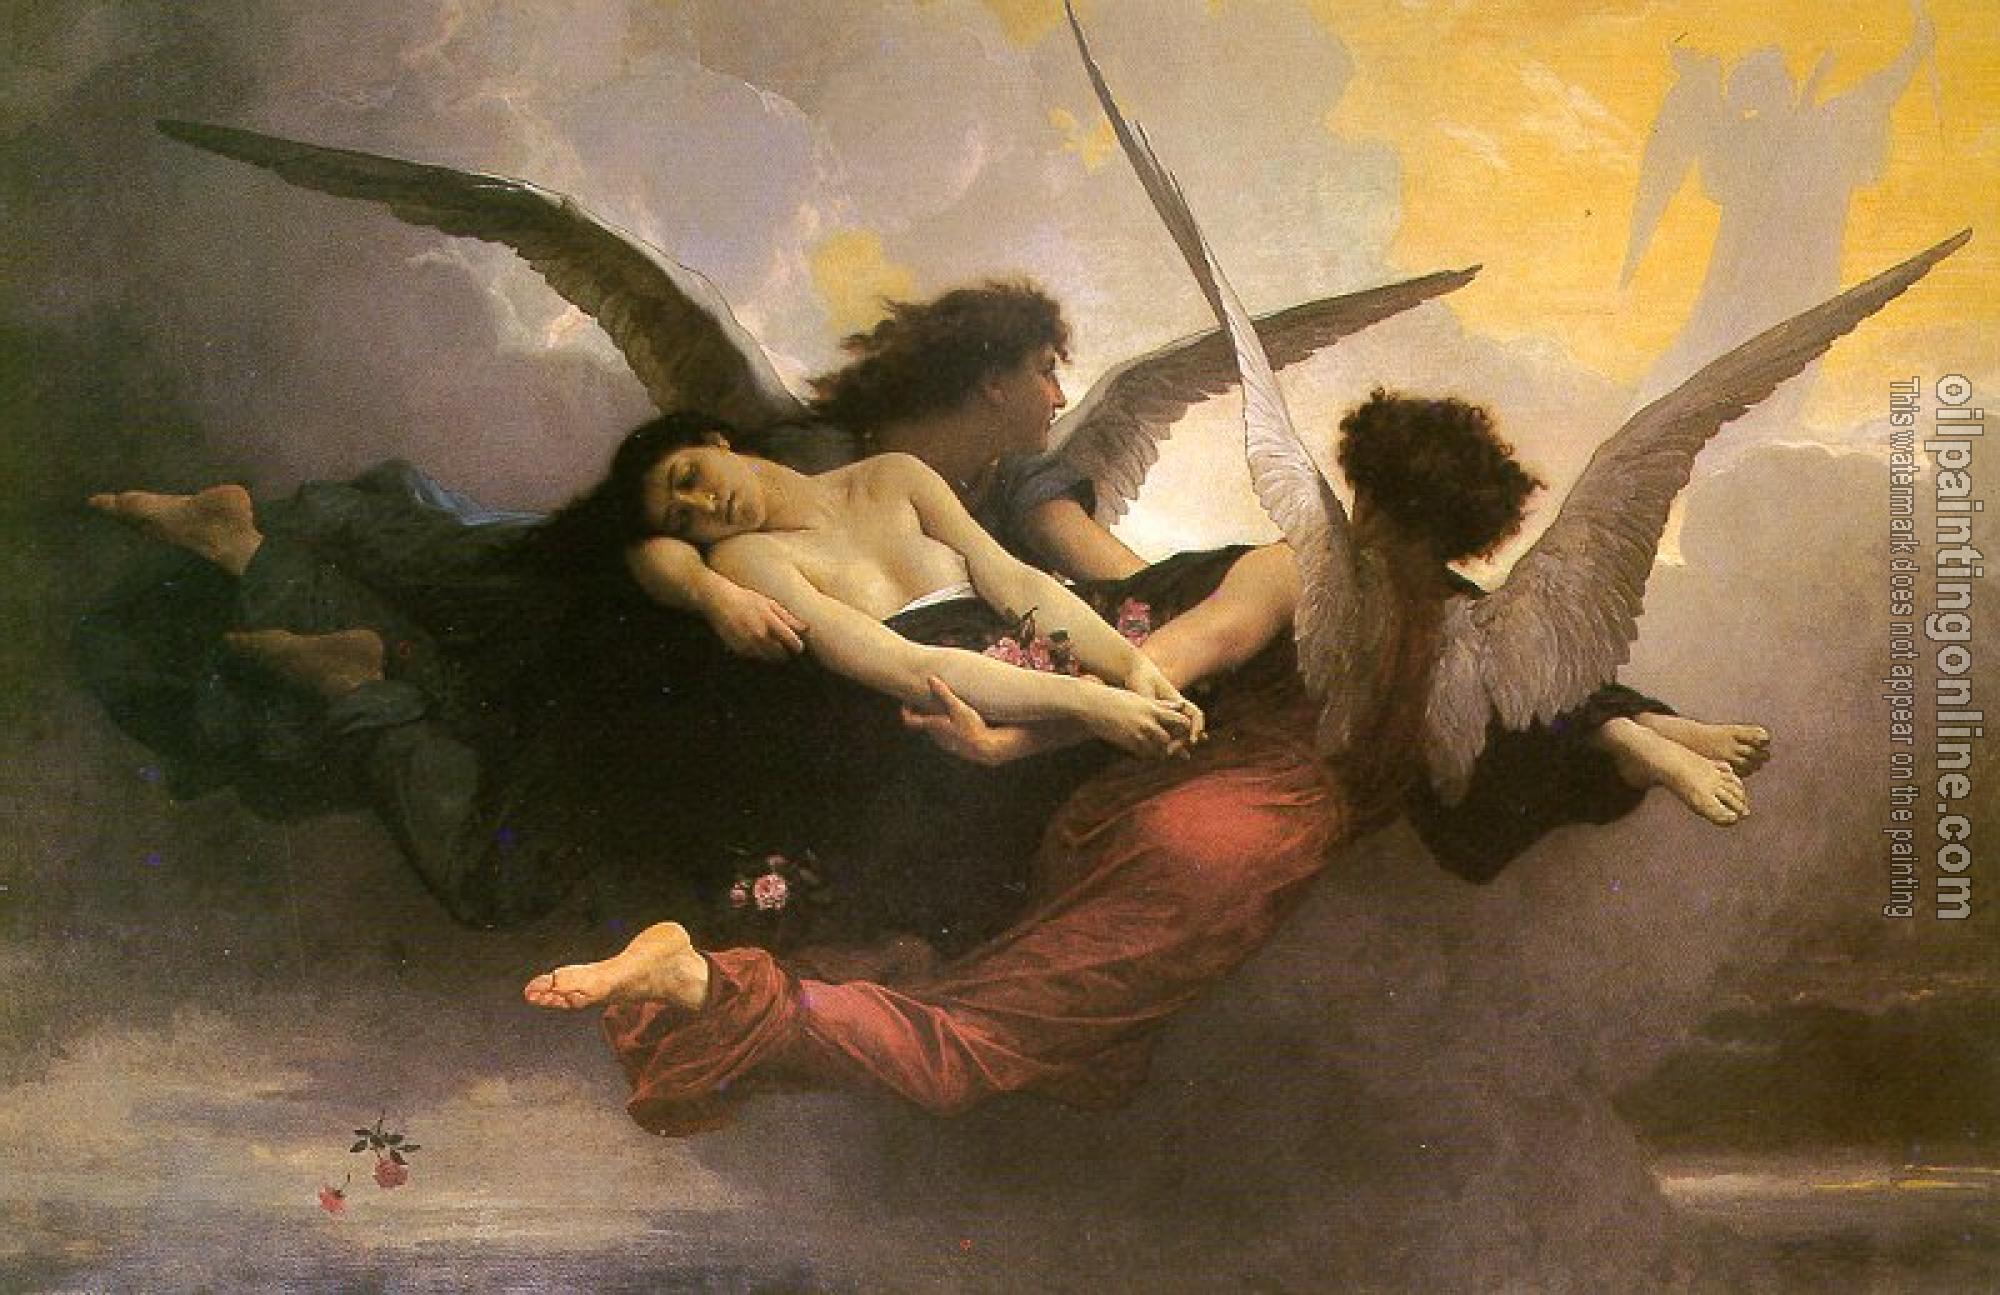 Bouguereau, William-Adolphe - A Soul Brought to Heaven